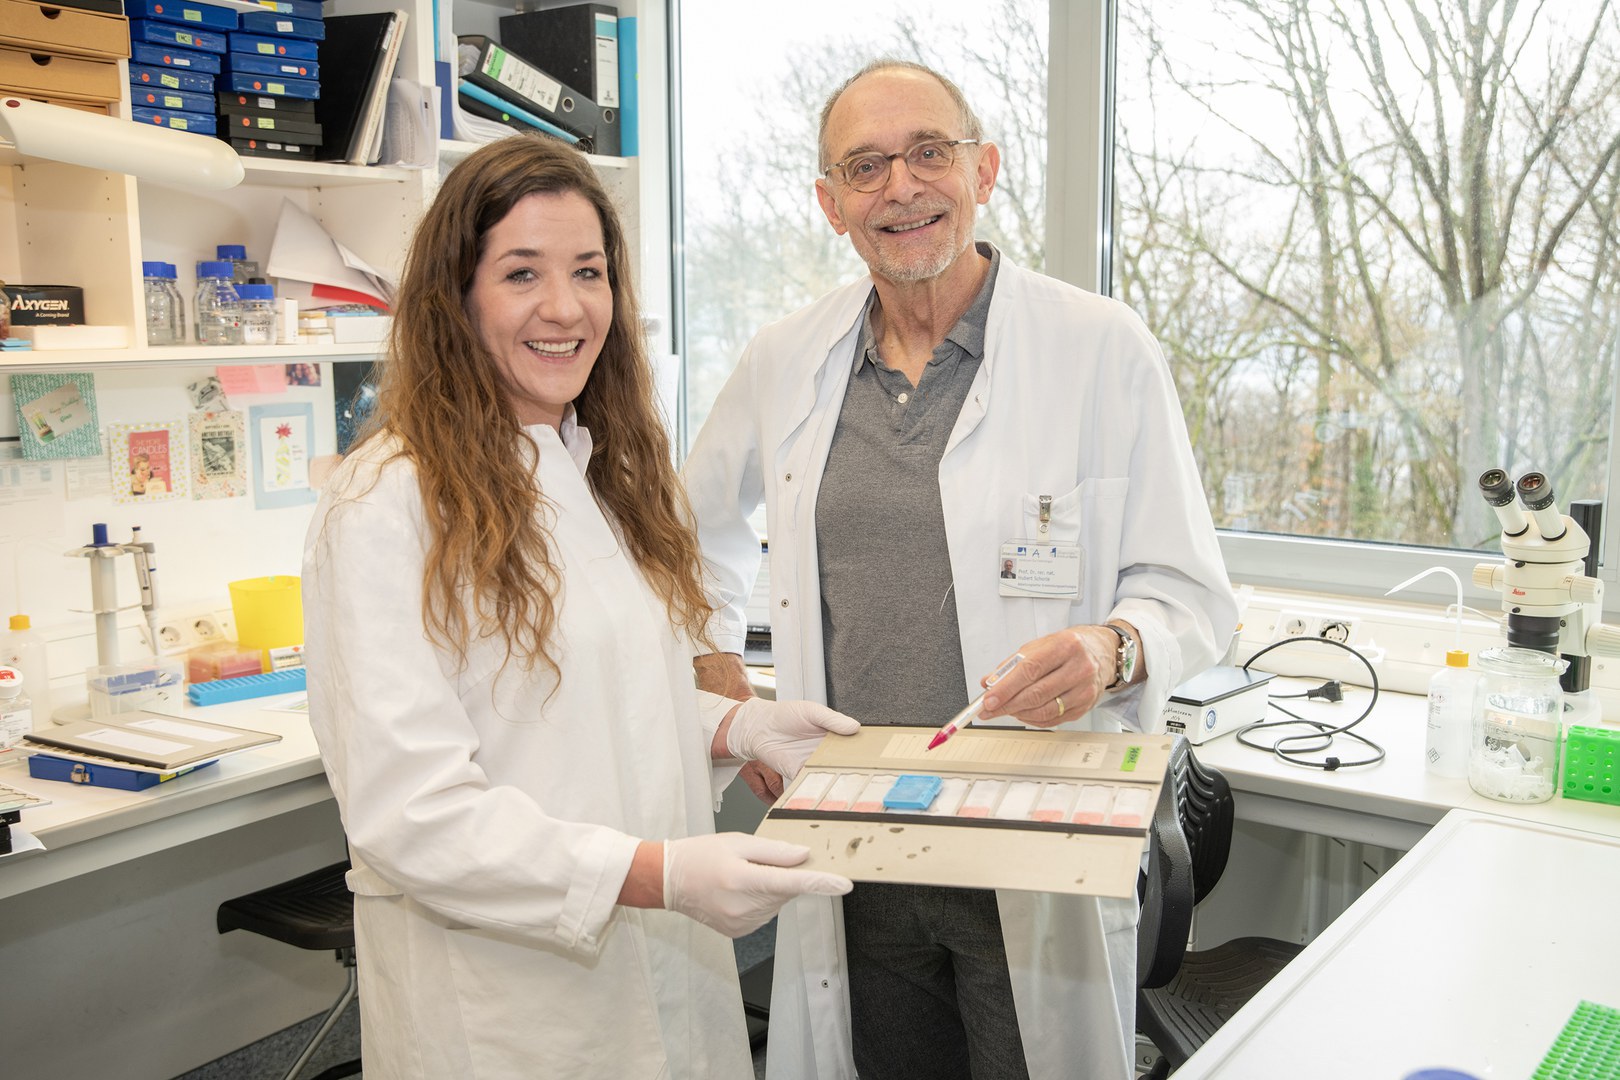 Possible cause of male infertility: - Gina Esther Merges and Prof. Hubert Schorle study genes involved in sperm maturation.